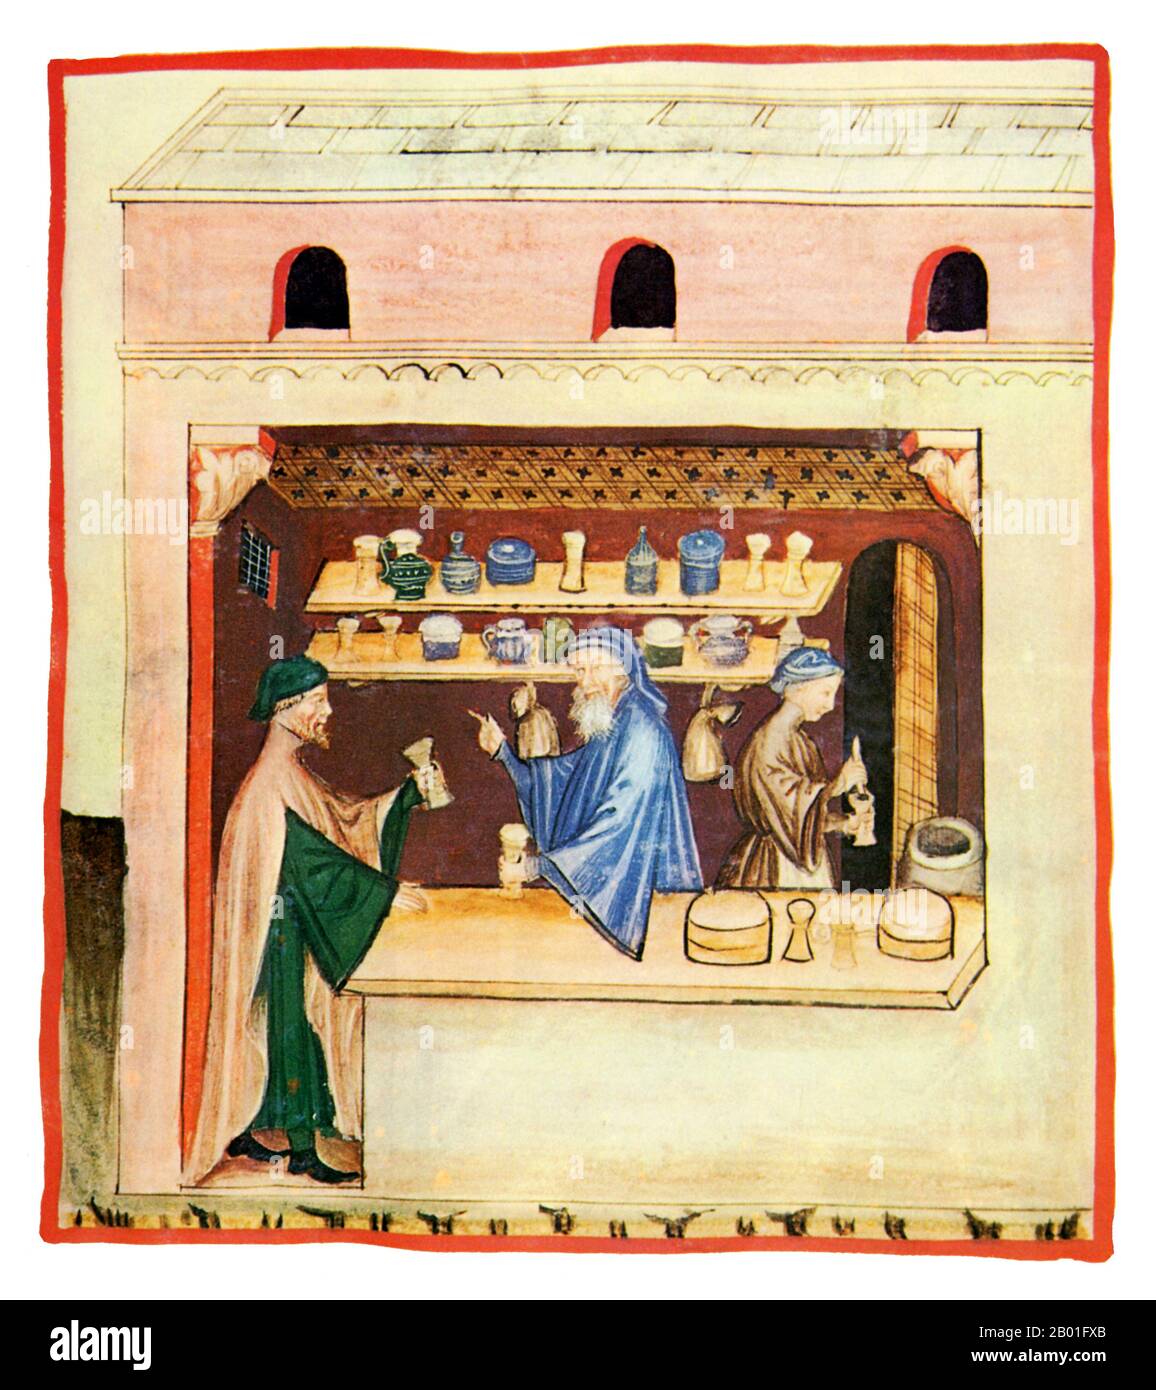 Iraq/Italy: Theriac (Triacha). Illustration from Ibn Butlan's Taqwim al-sihha or 'Maintenance of Health' (Baghdad, 11th century), published in Italy as the Tacuinum Sanitatis, 14th century.  The Tacuinum (sometimes Taccuinum) Sanitatis is a medieval handbook on health and well being, based on the Taqwim al‑sihha تقويم الصحة ('Maintenance of Health'), an eleventh-century Arab medical treatise by Ibn Butlan of Baghdad.  Ibn Butlân was a Christian physician born in Baghdad and who died in 1068. Stock Photo